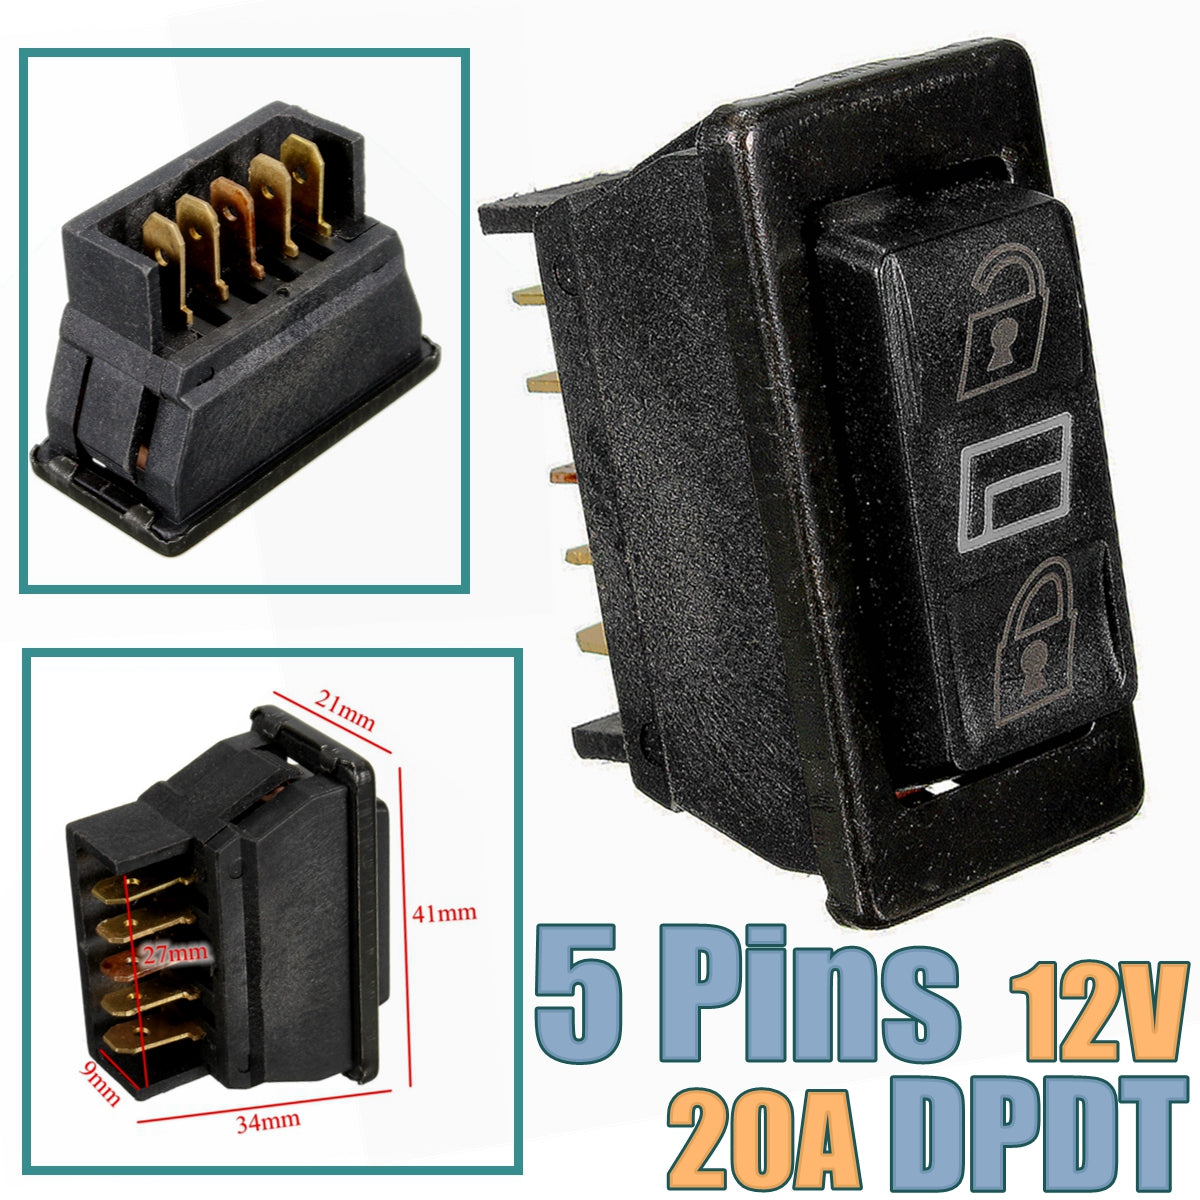 12V 20A 3 in 1 Car 5pins DPDT Botton Momentary Rocker Switch